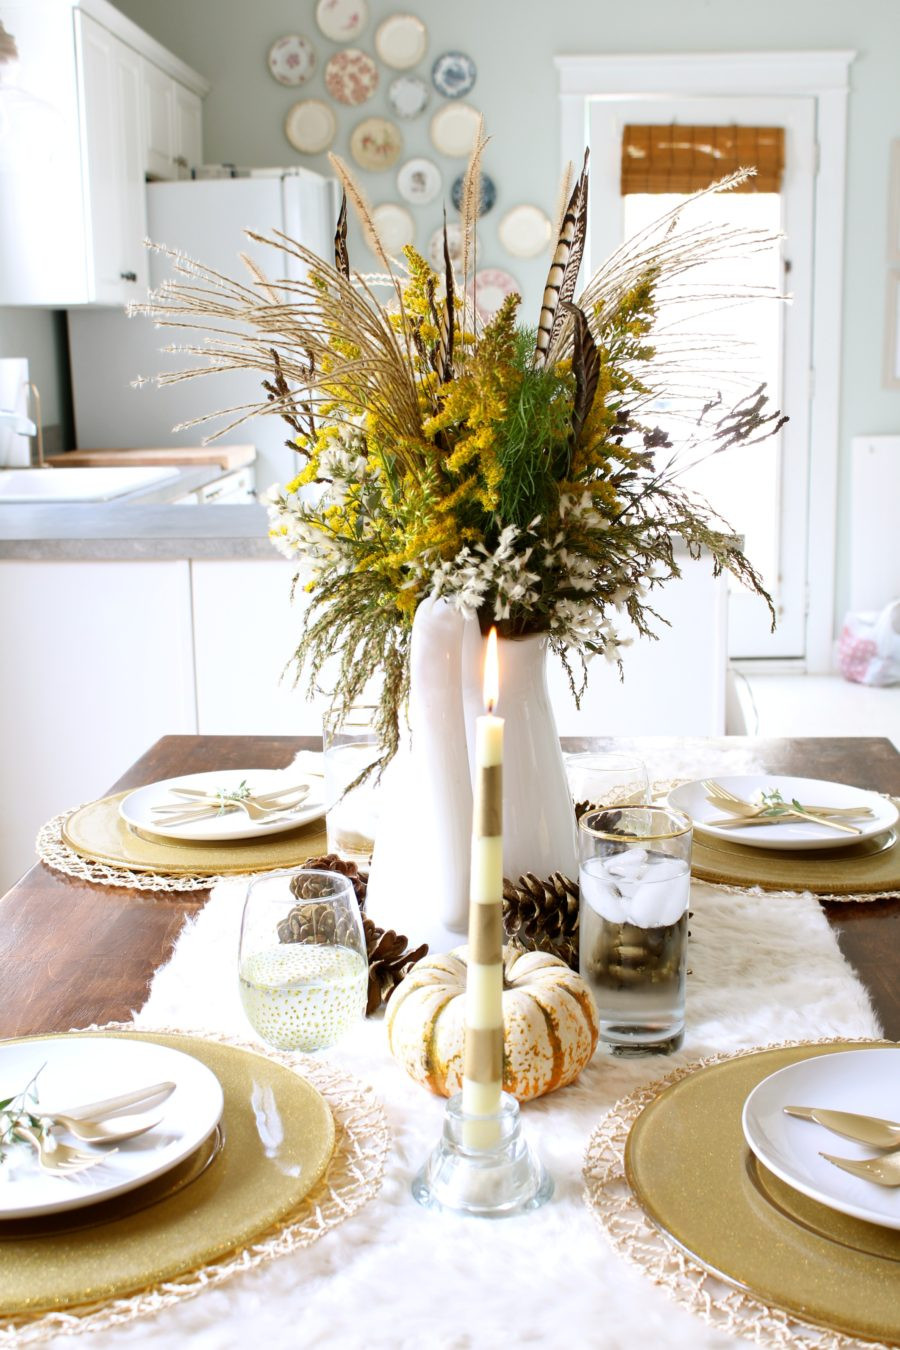 Easy Thanksgiving Table Decorations
 Gorgeous Dining Table Fall Decor Ideas for Every Special